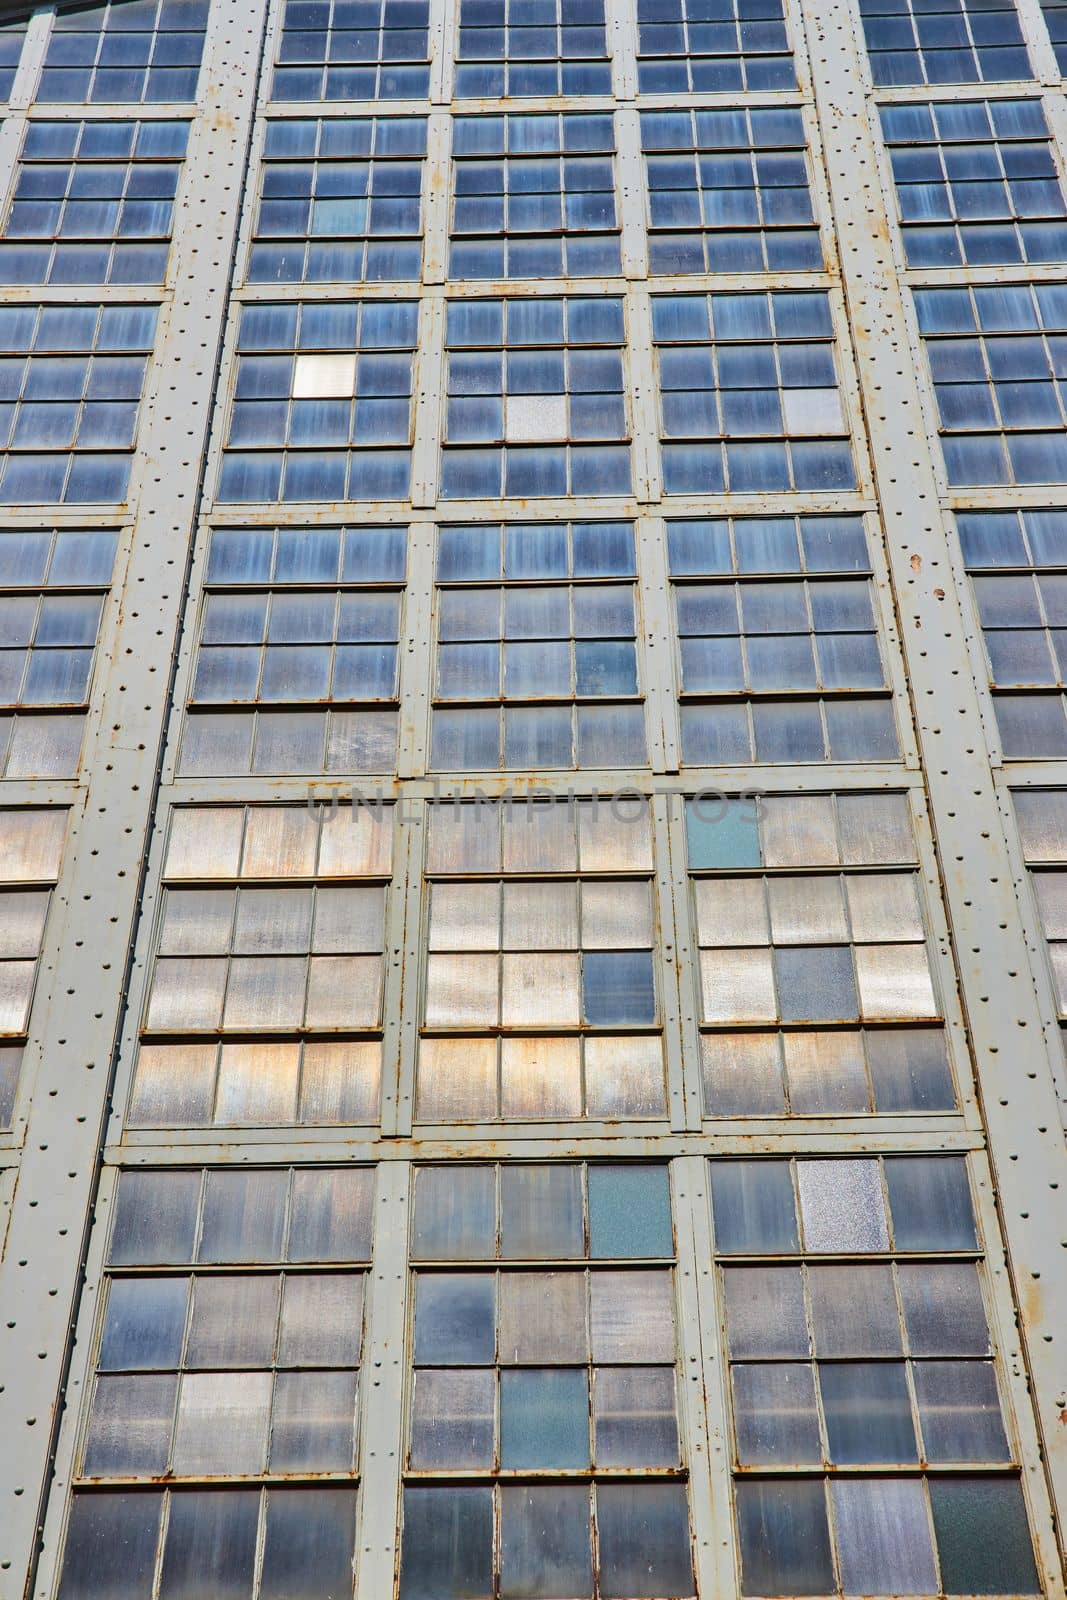 Image of Endless shades of industrial windows on exterior of building